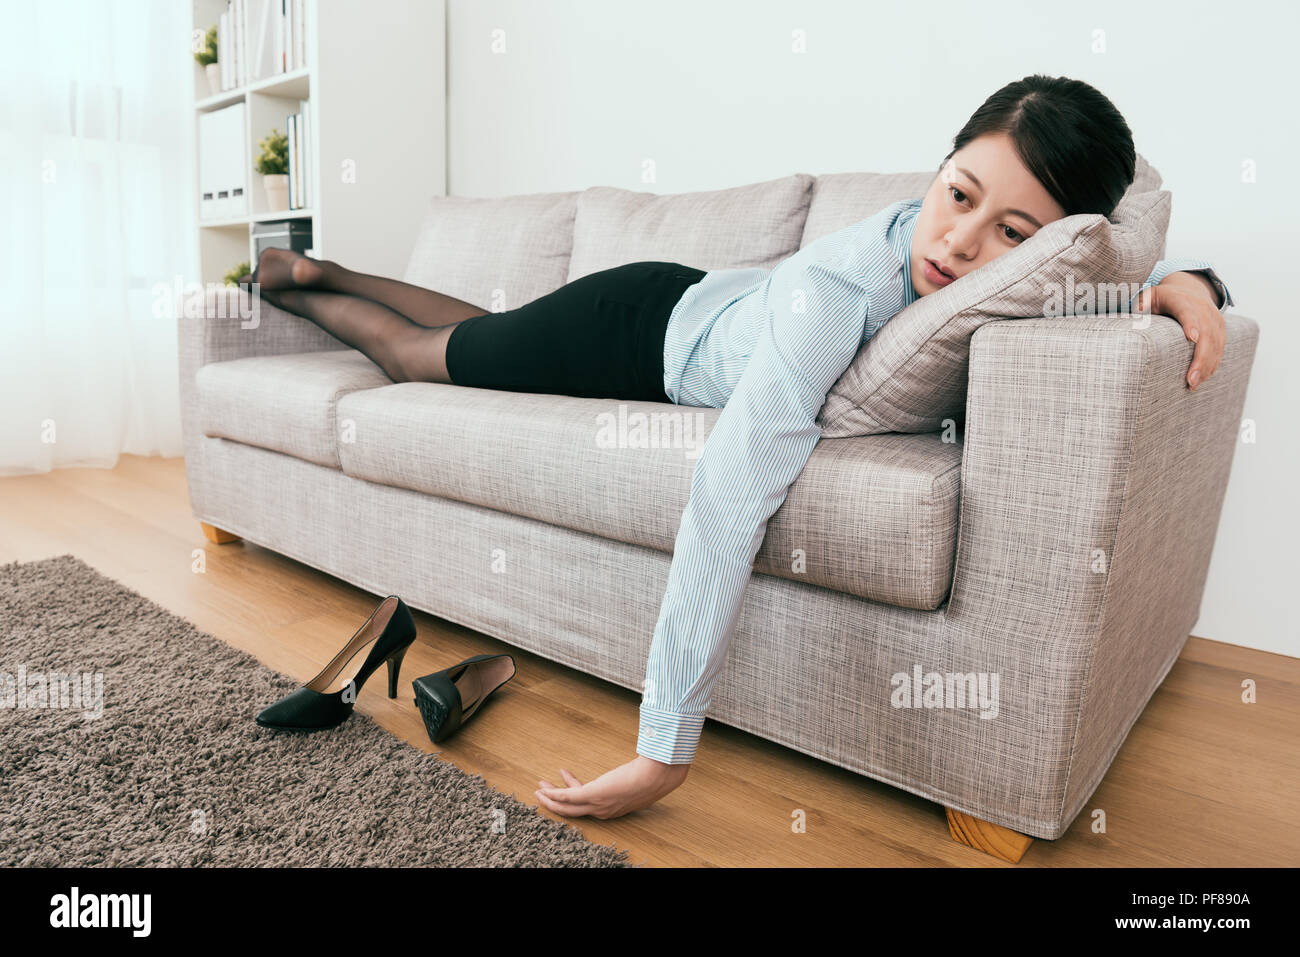 she got the blow from work and lie down on the soft feel frustration at home Stock Photo